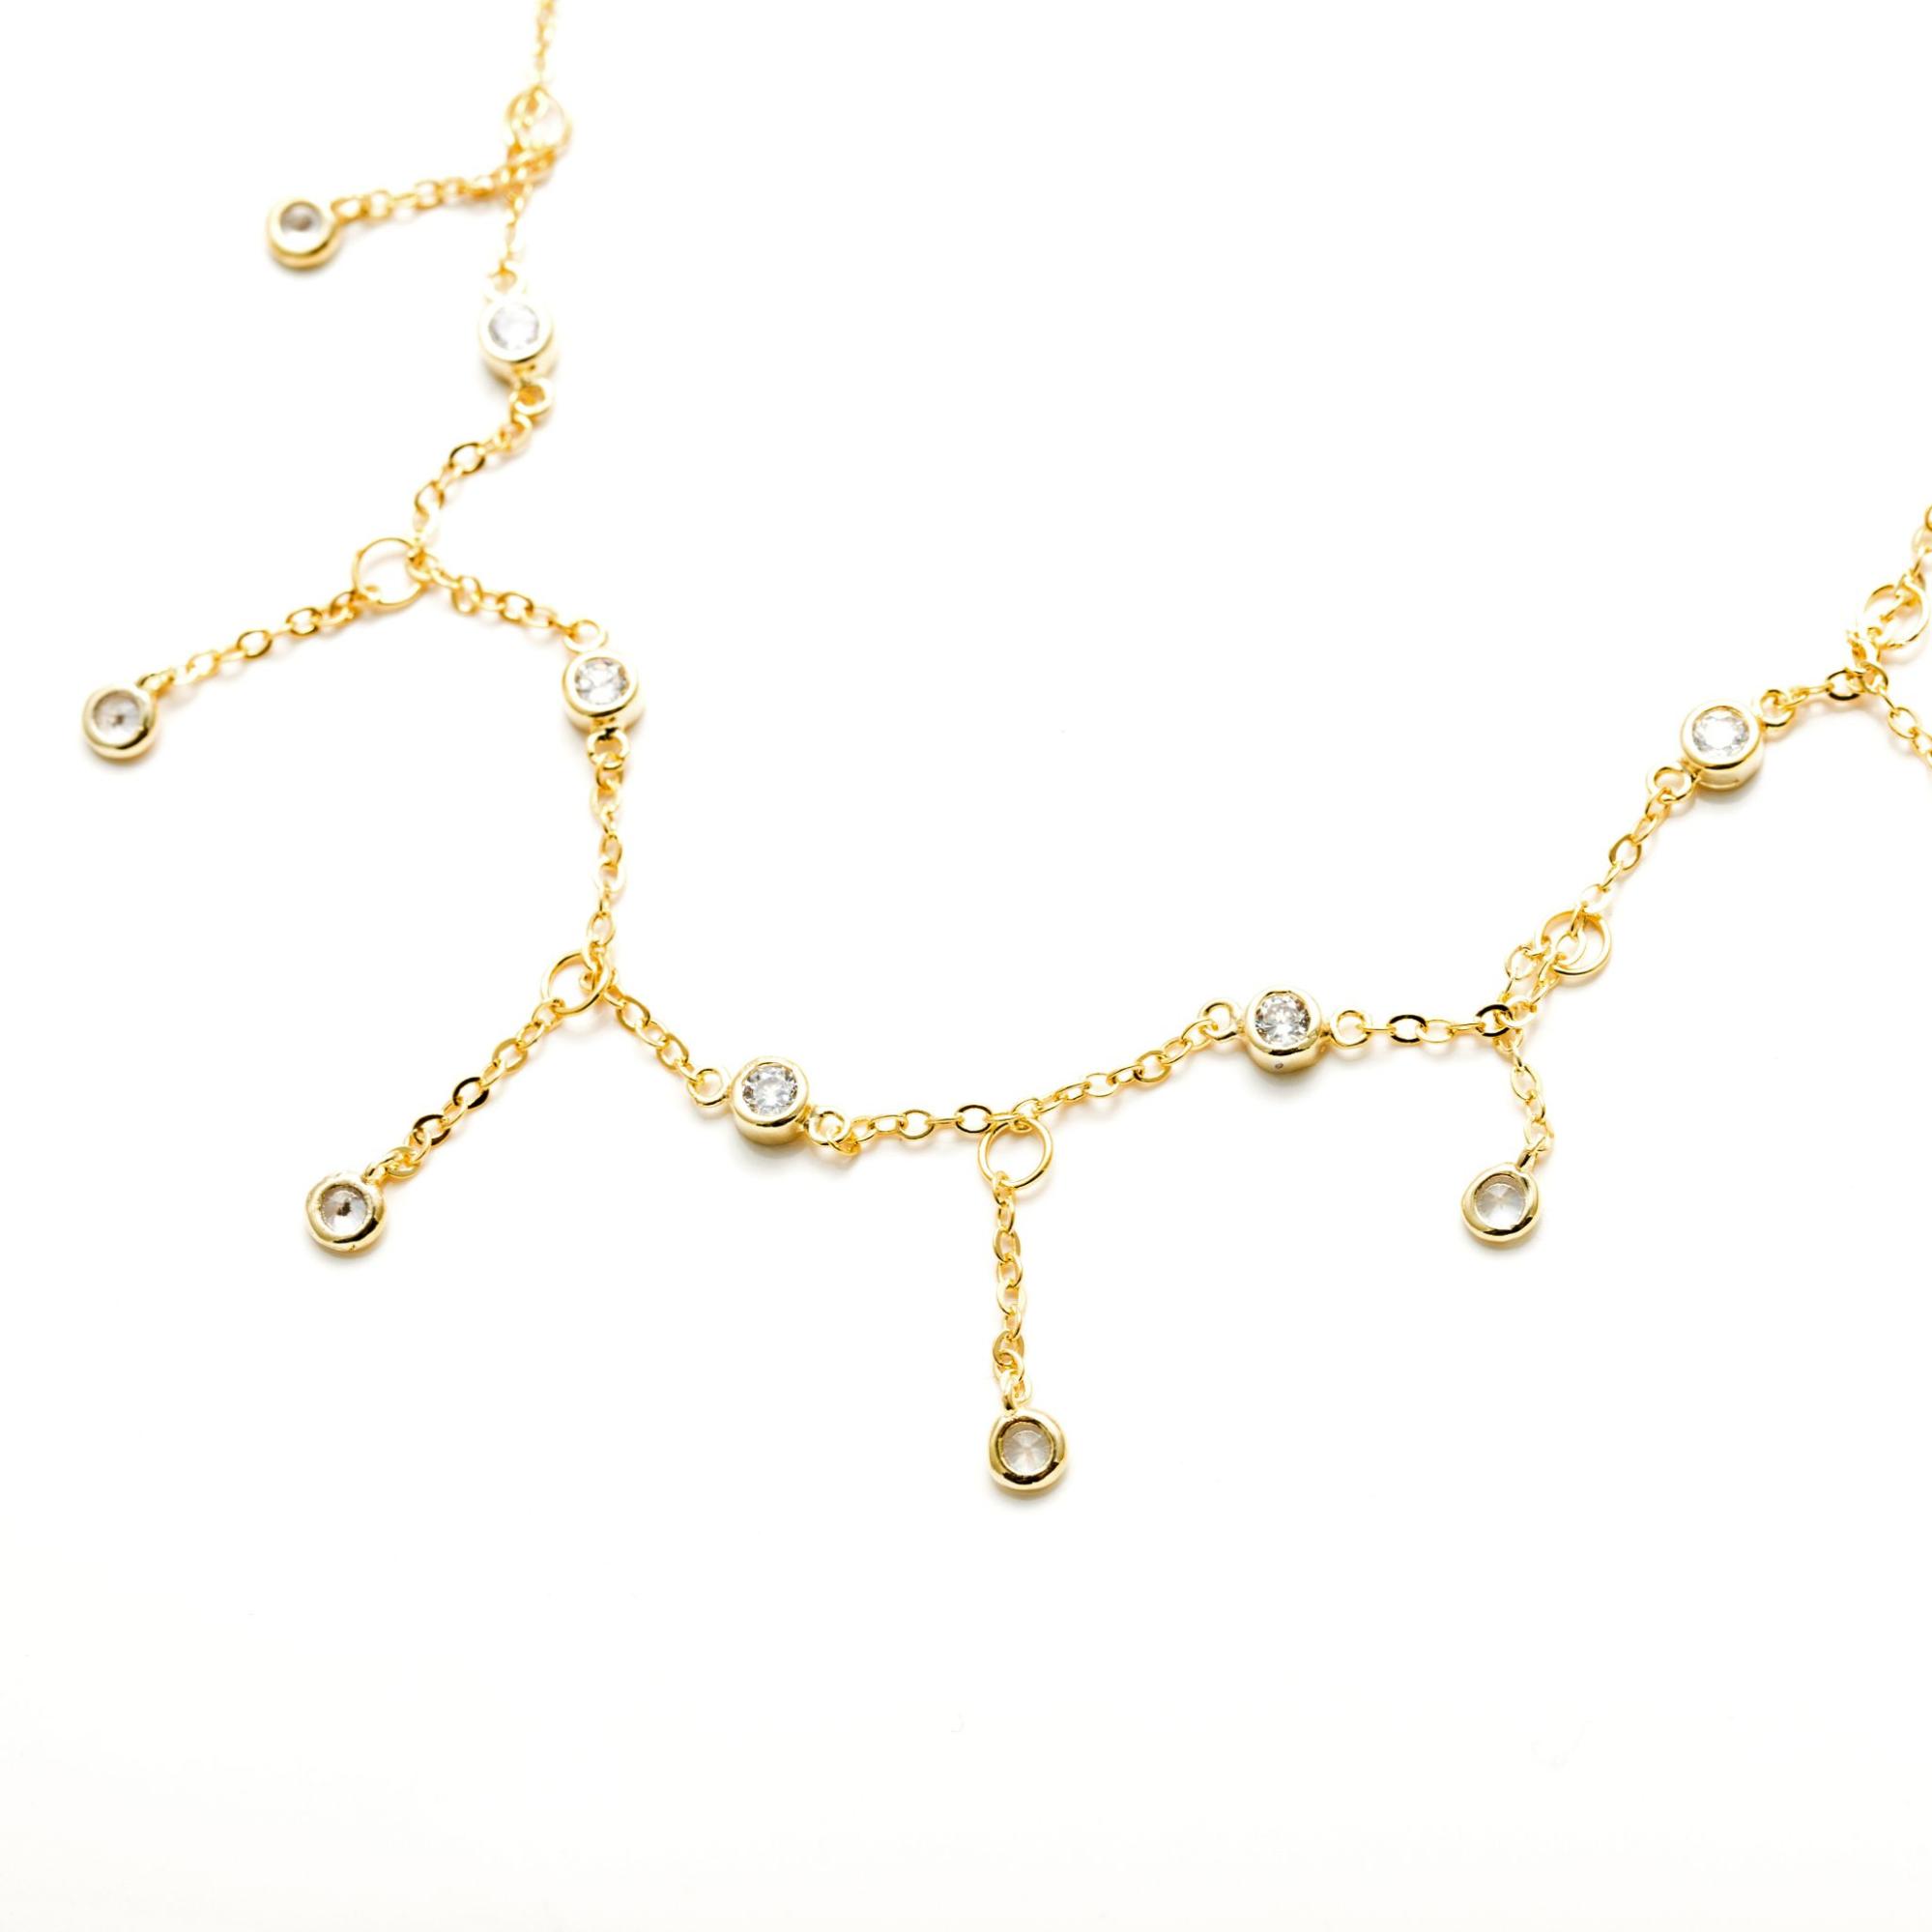 A yellow gold diamond station necklace